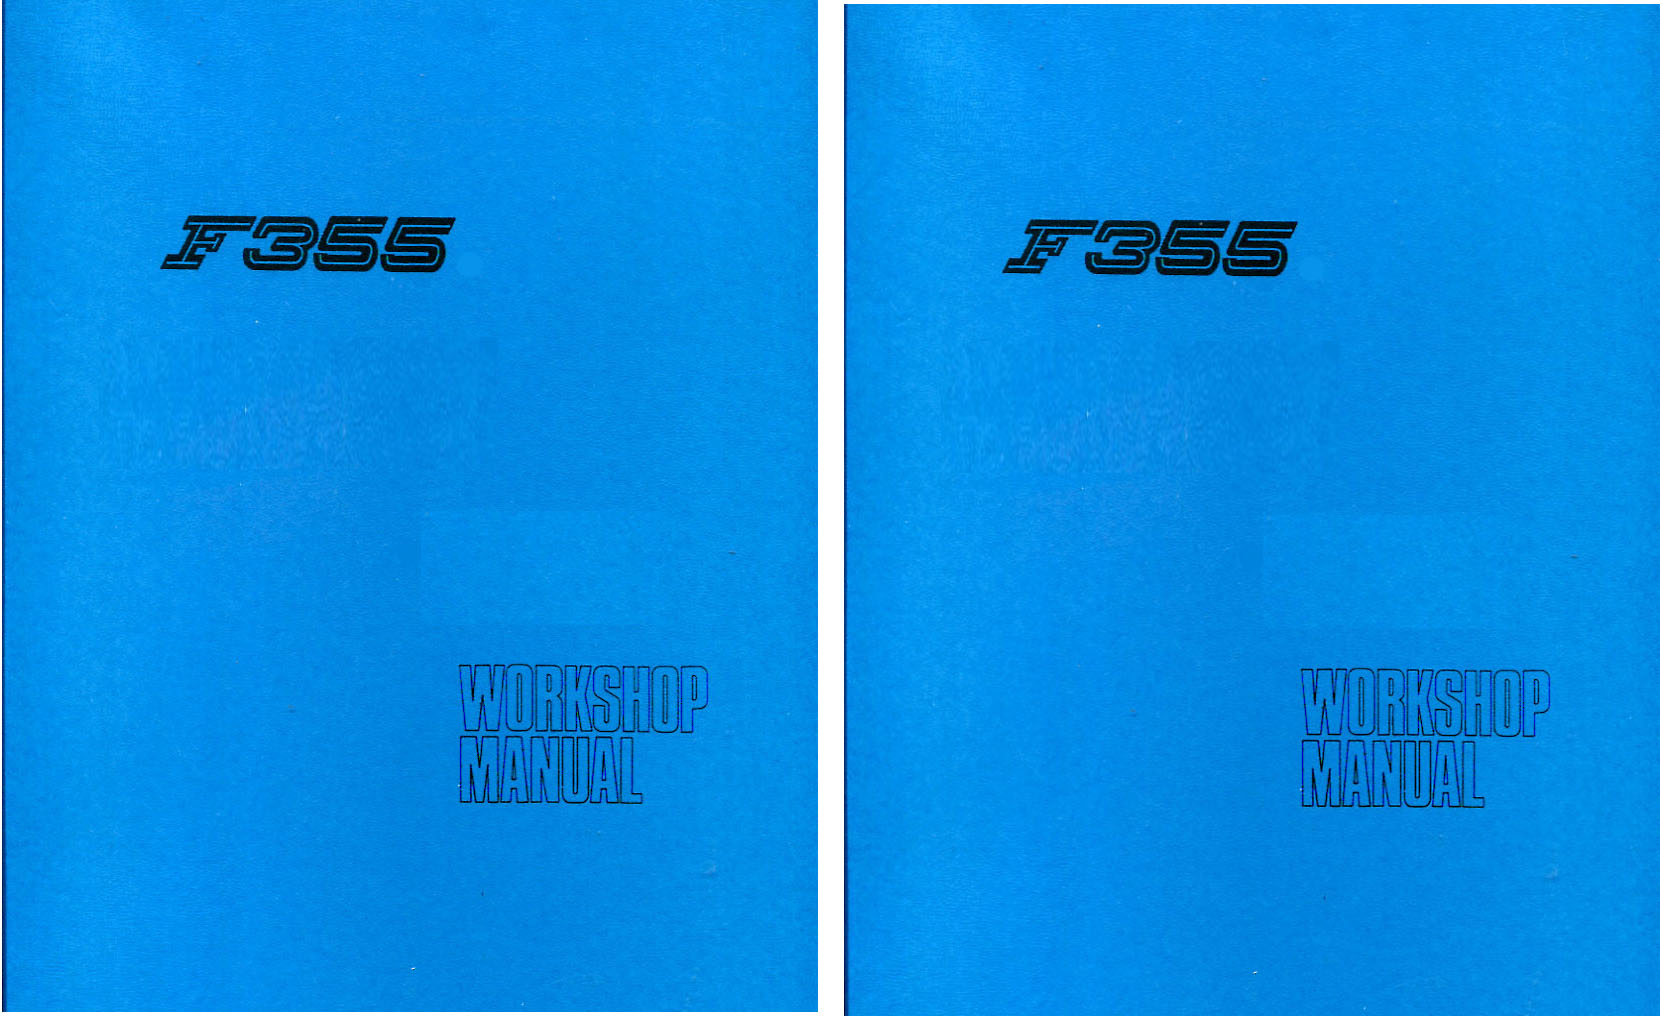 F355 Shop Service Repair Manual by Ferrari covering Mechanical & Electrical in 2 volumes includes Cabriolet